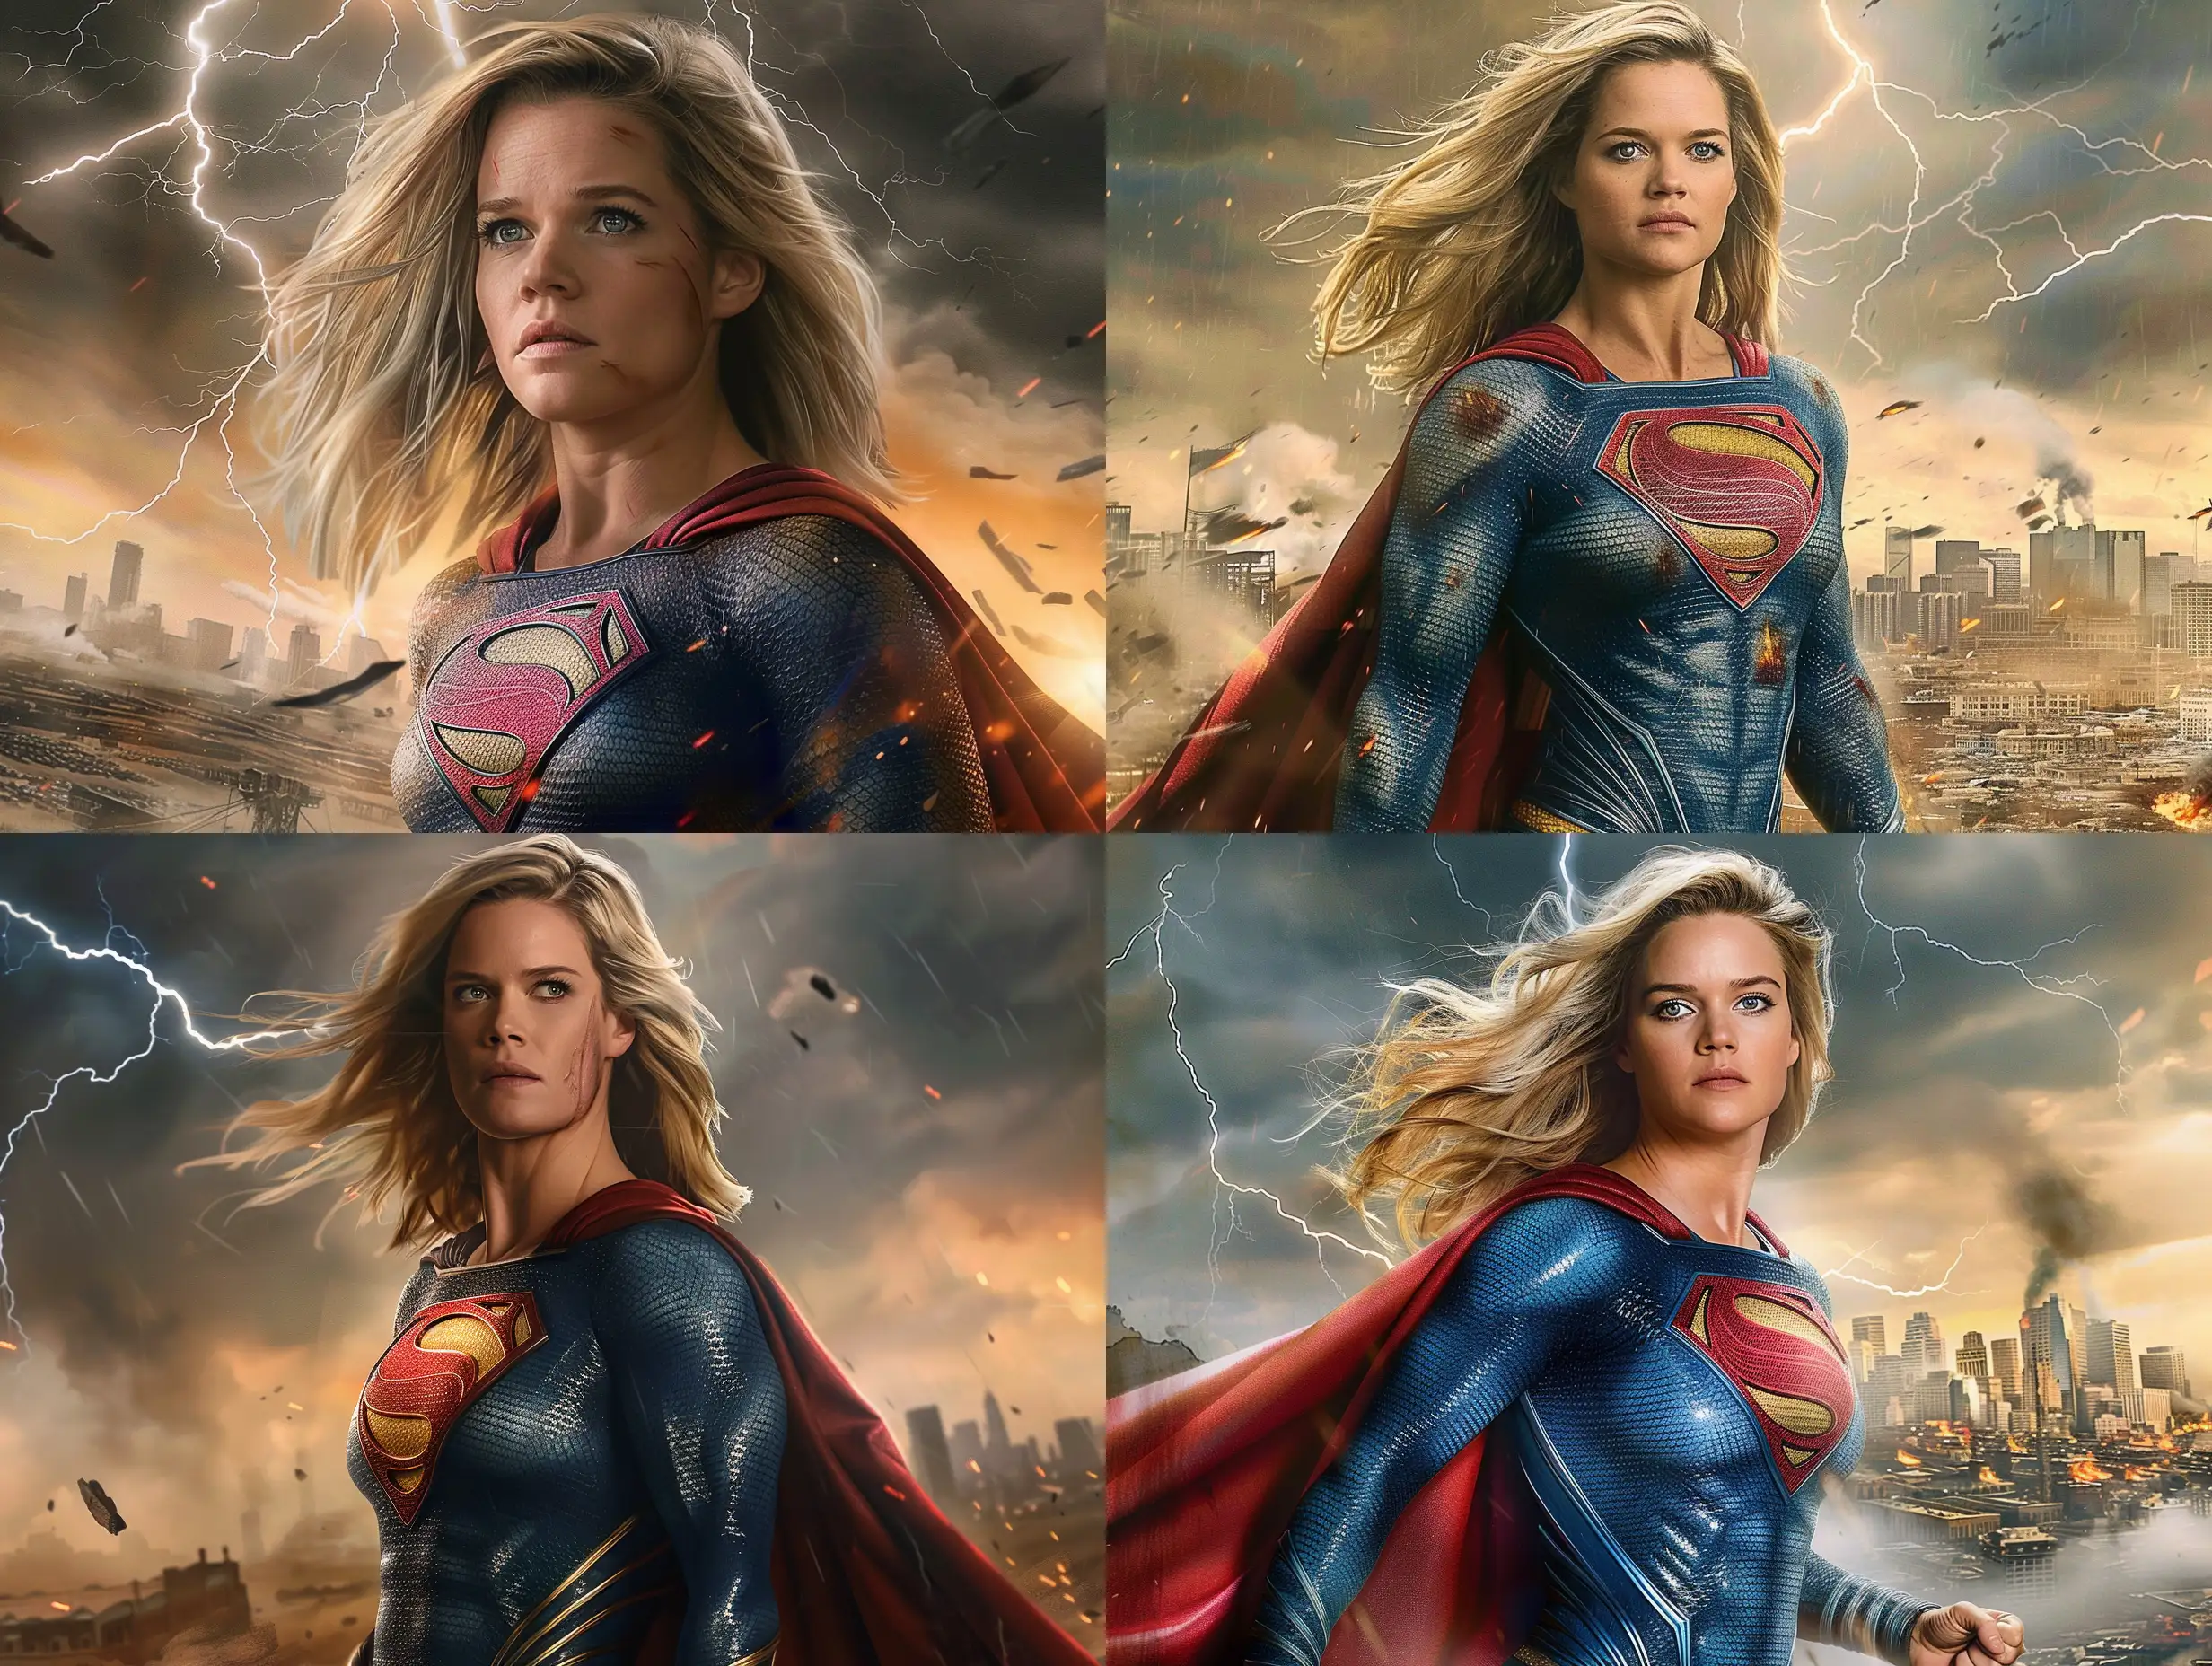 Reese Witherspoon as a superhero, artistic, superman pose, movie poster, distant city in chaos in background, lightning in sky